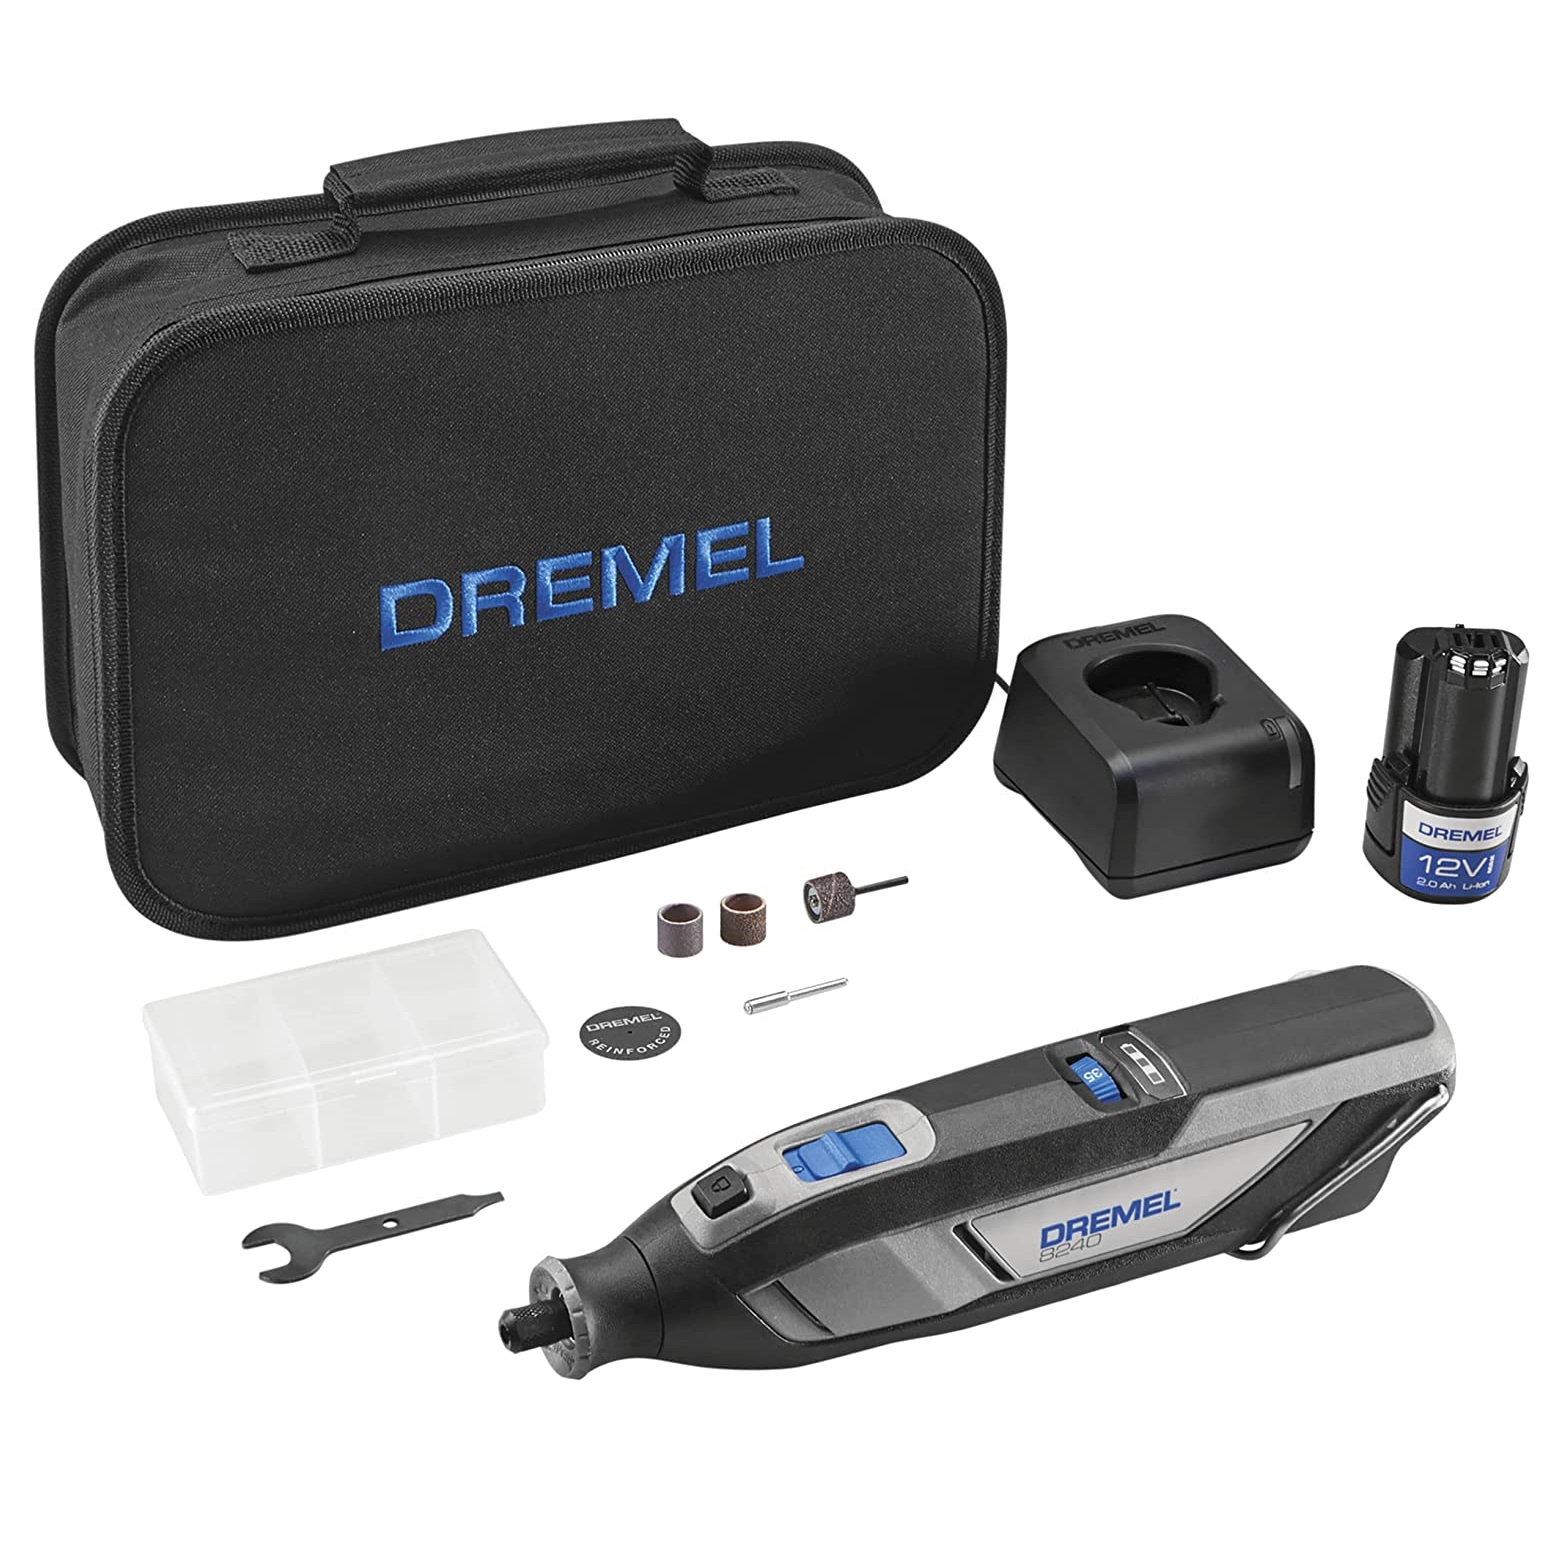 Dremel 8240 12V Cordless Rotary Tool Kit with Variable Speed and Comfort  Grip - Includes 2AH Battery Pack, Charger, 5 Accessories & Wrench, Tool  Fabric Carry Bag, and Instruction Manual